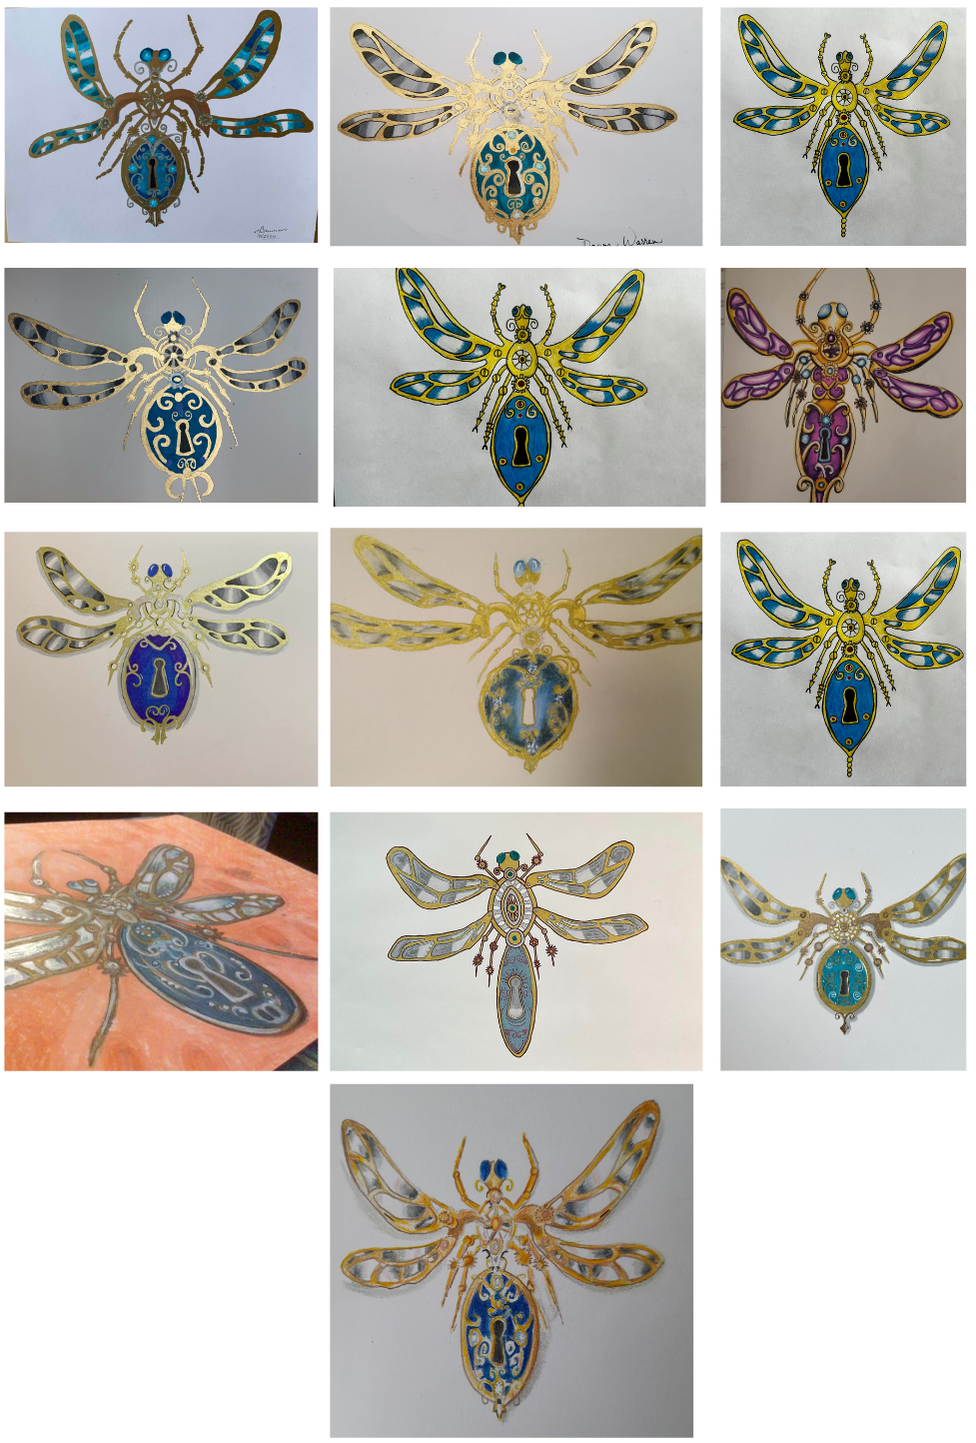 Student Artwork from Steampunk Dragonfly Online Art Lesson with Karen Campbell Artist in the Fun Fab Drawing Club